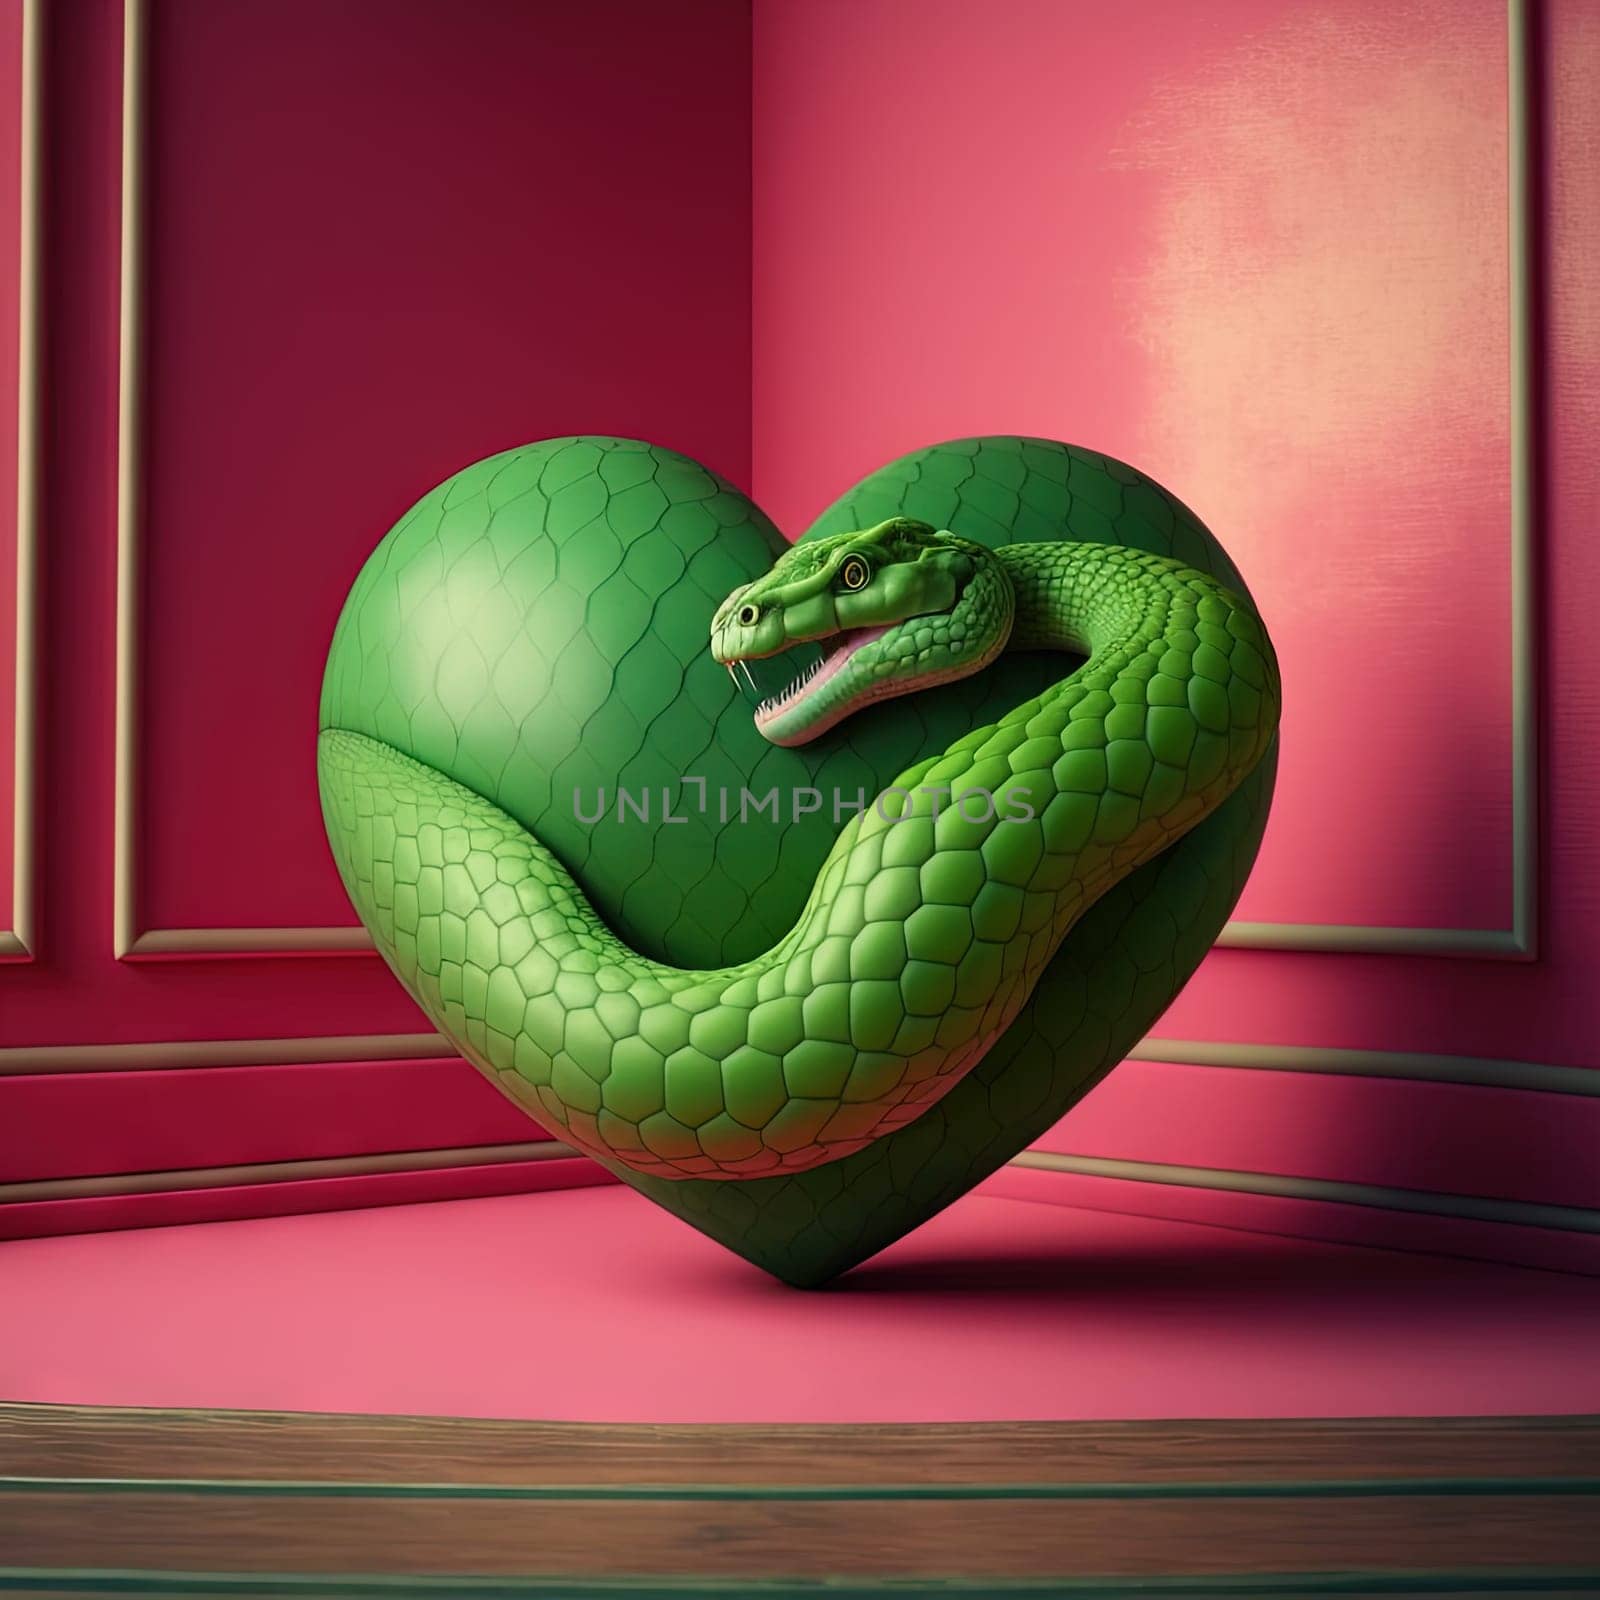 Snake in the shape of heart. Love and relationships symbol for tricky Valentine's Day card. Playful or abusive relationships concept.